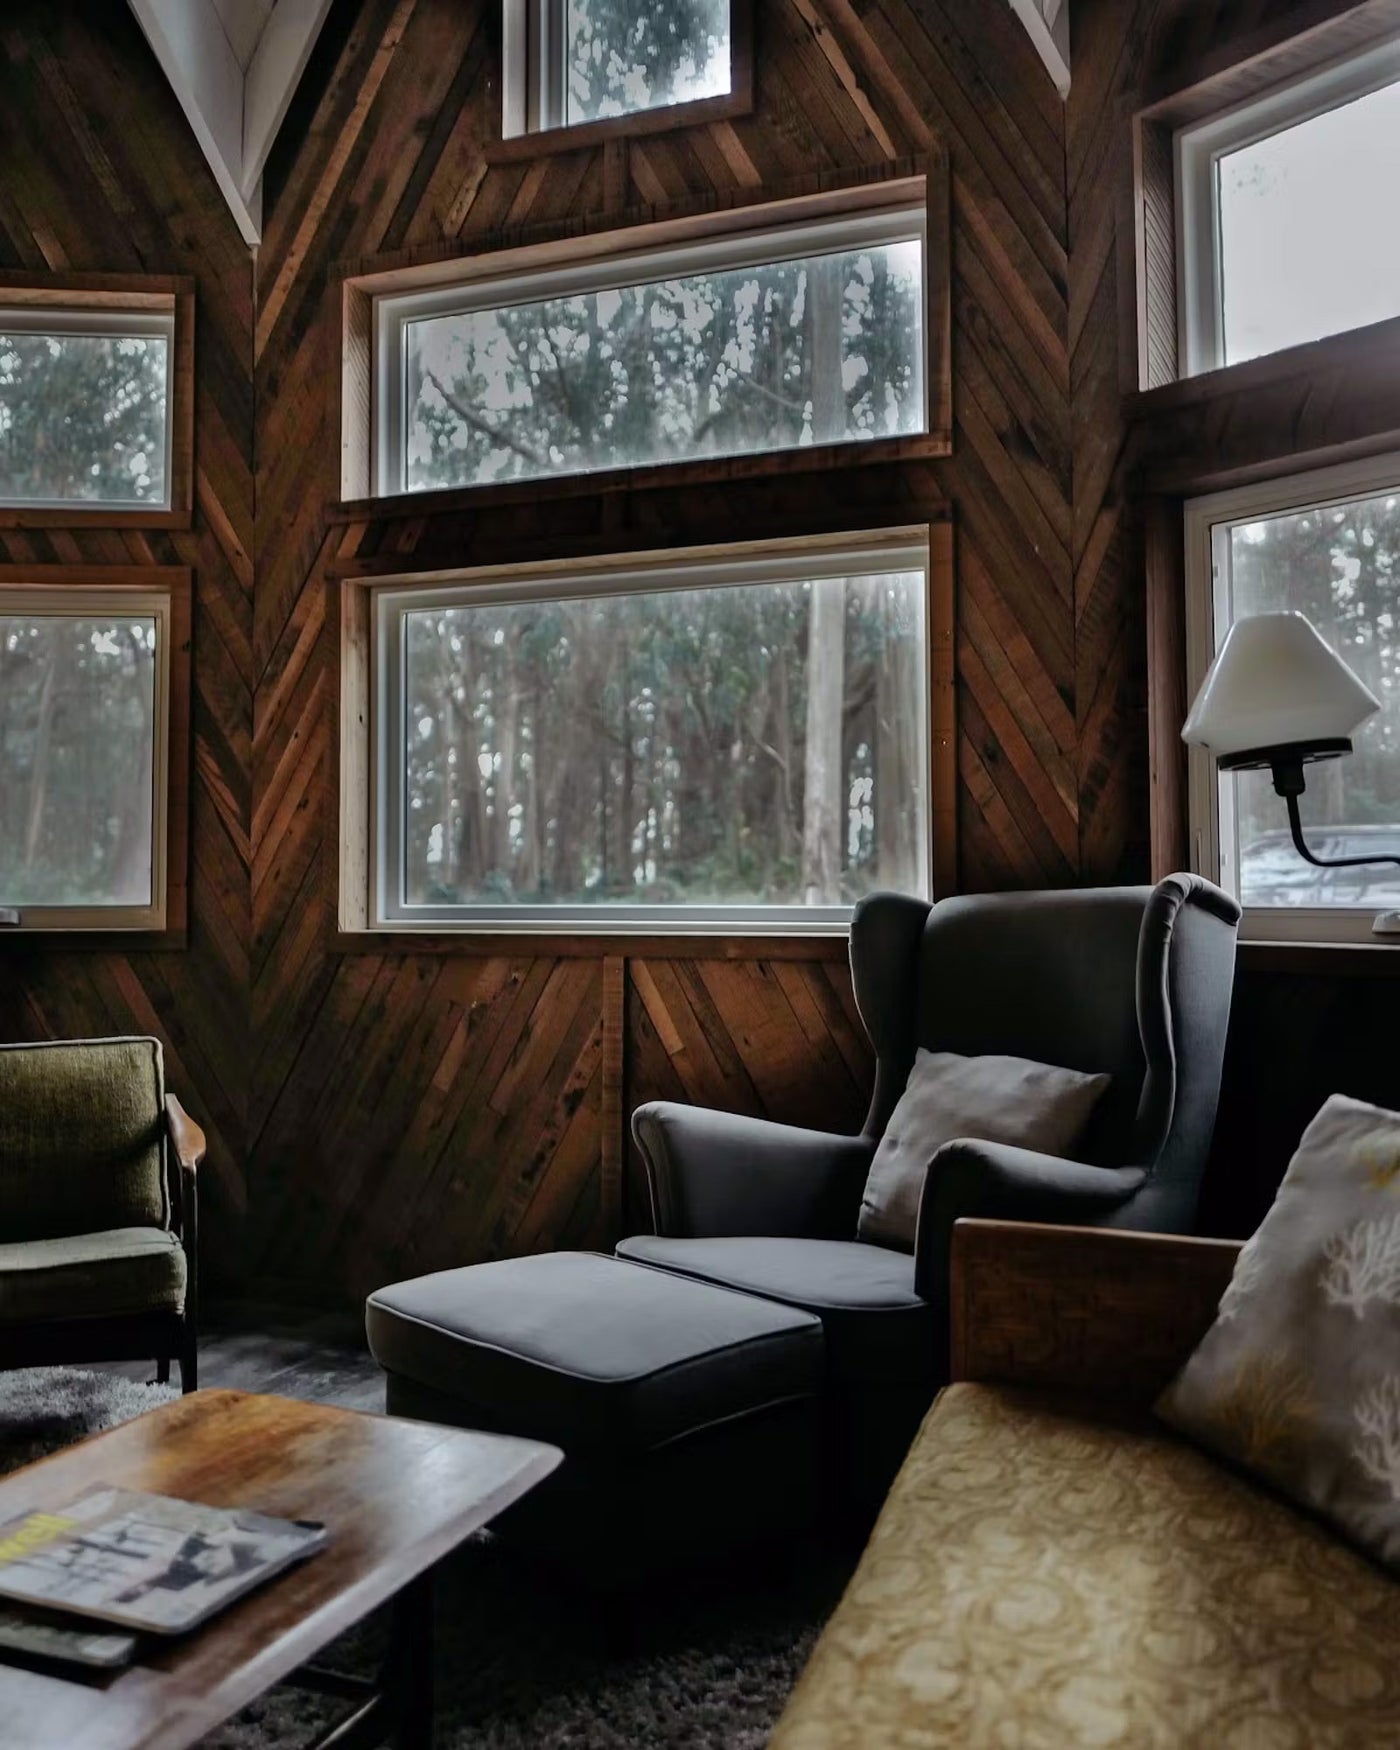 A cozy and well furnished living room inside a cabin with large windows